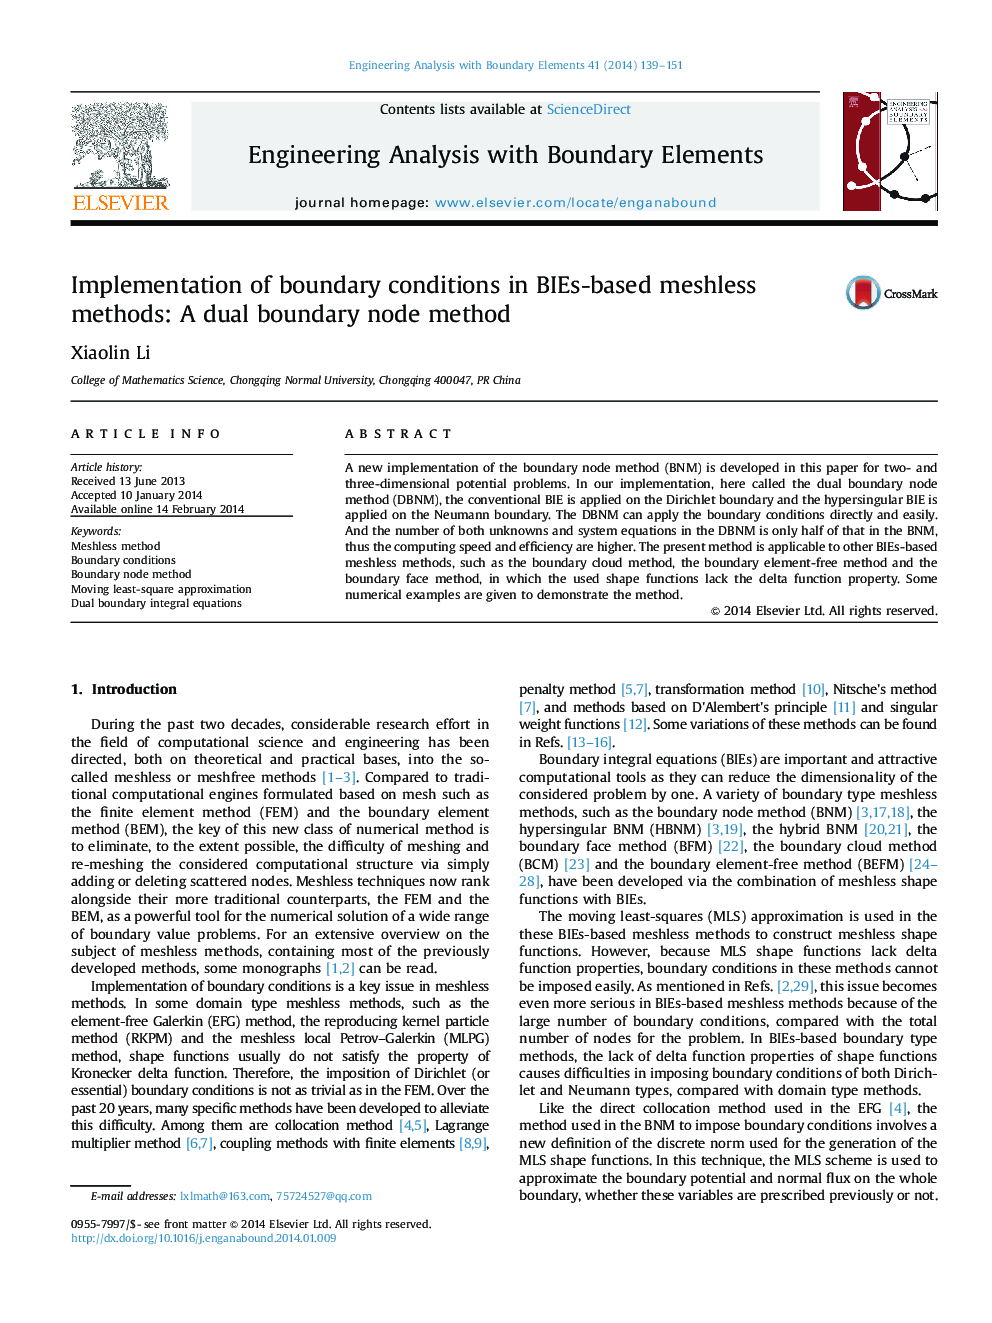 Implementation of boundary conditions in BIEs-based meshless methods: A dual boundary node method